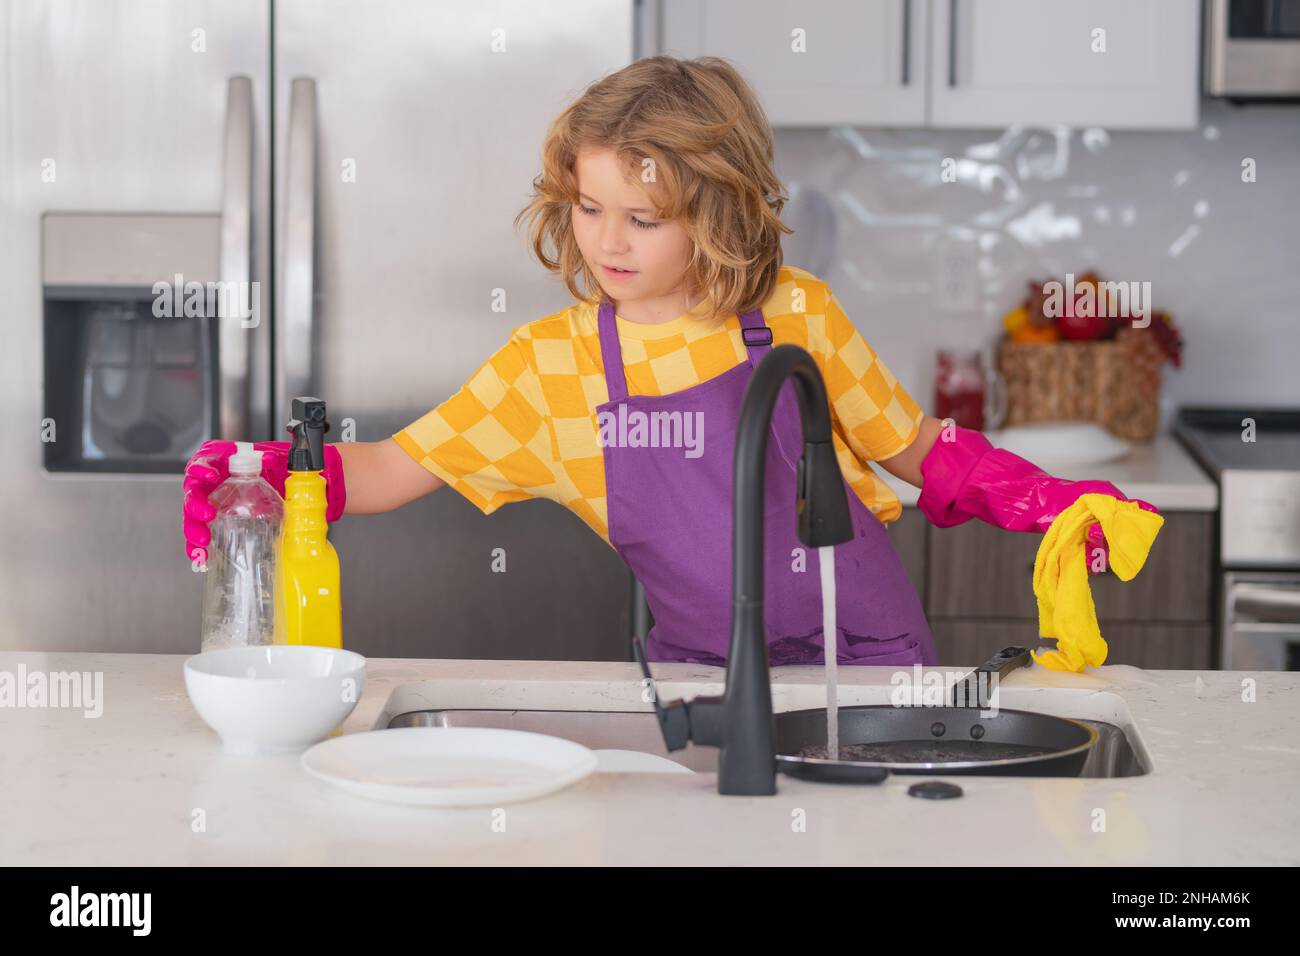 Dish washing concept. Child boy washing the dishes in the kitchen